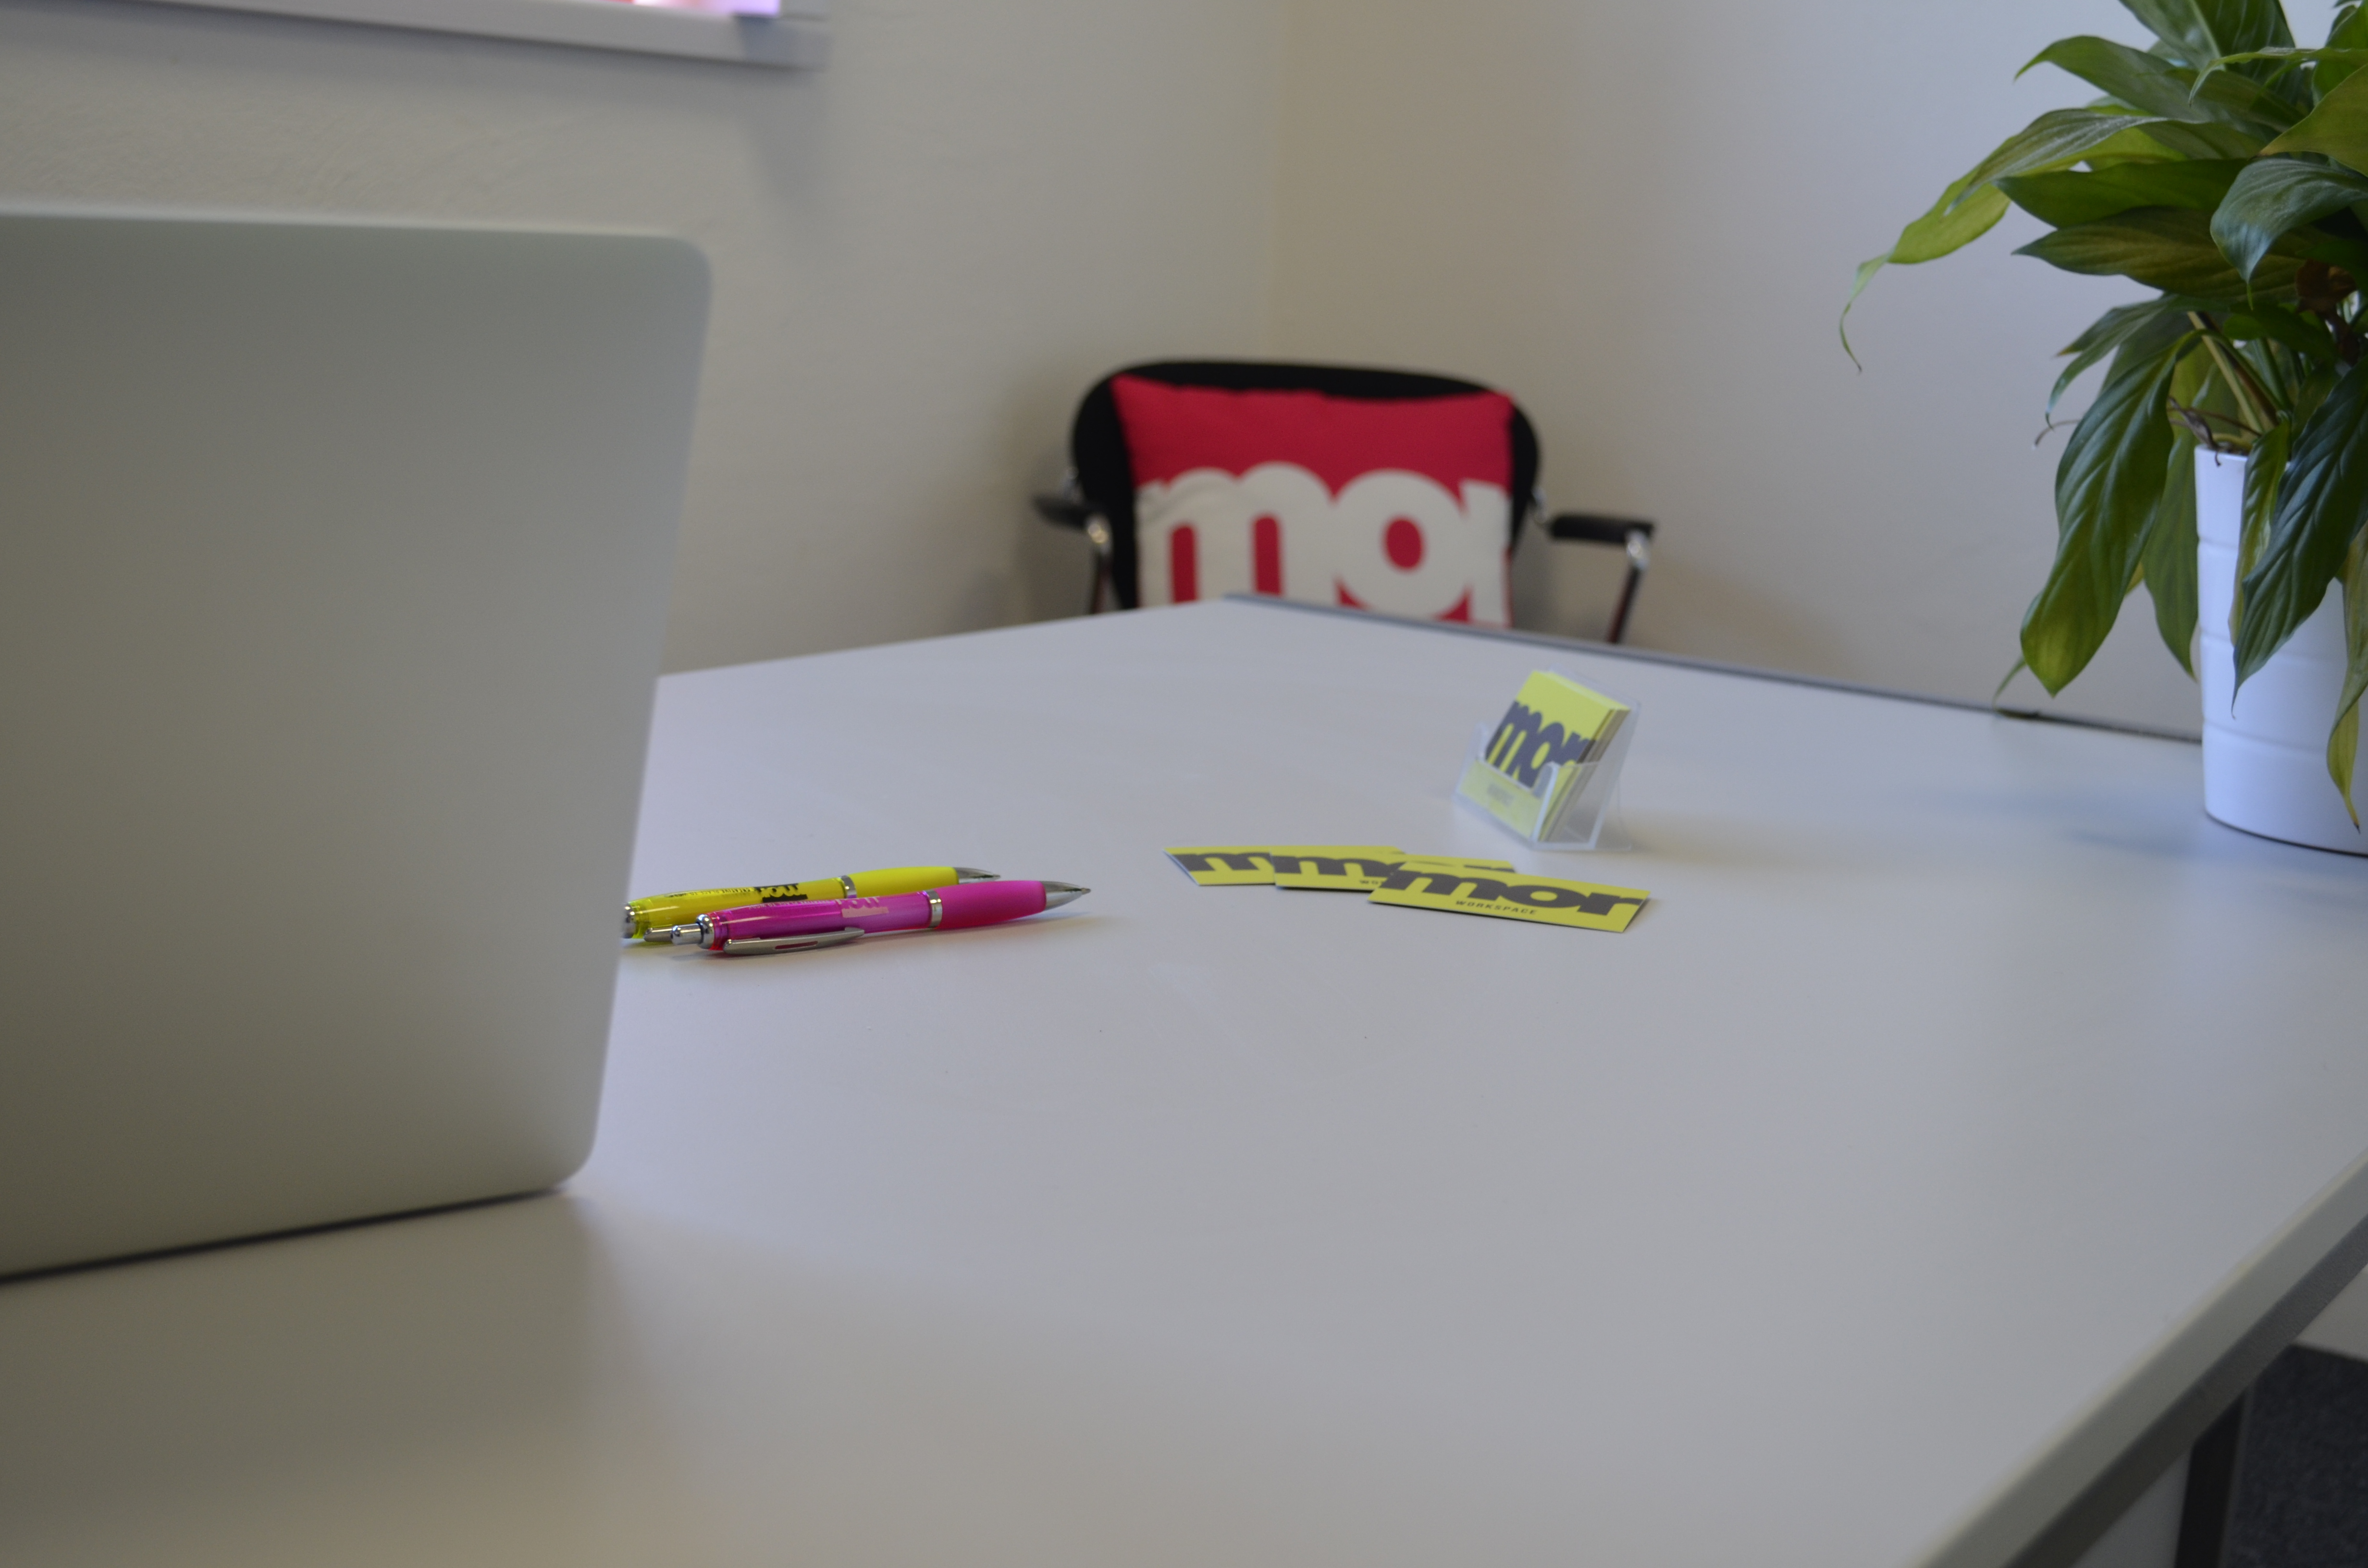 Desk with branded pens and company cards on